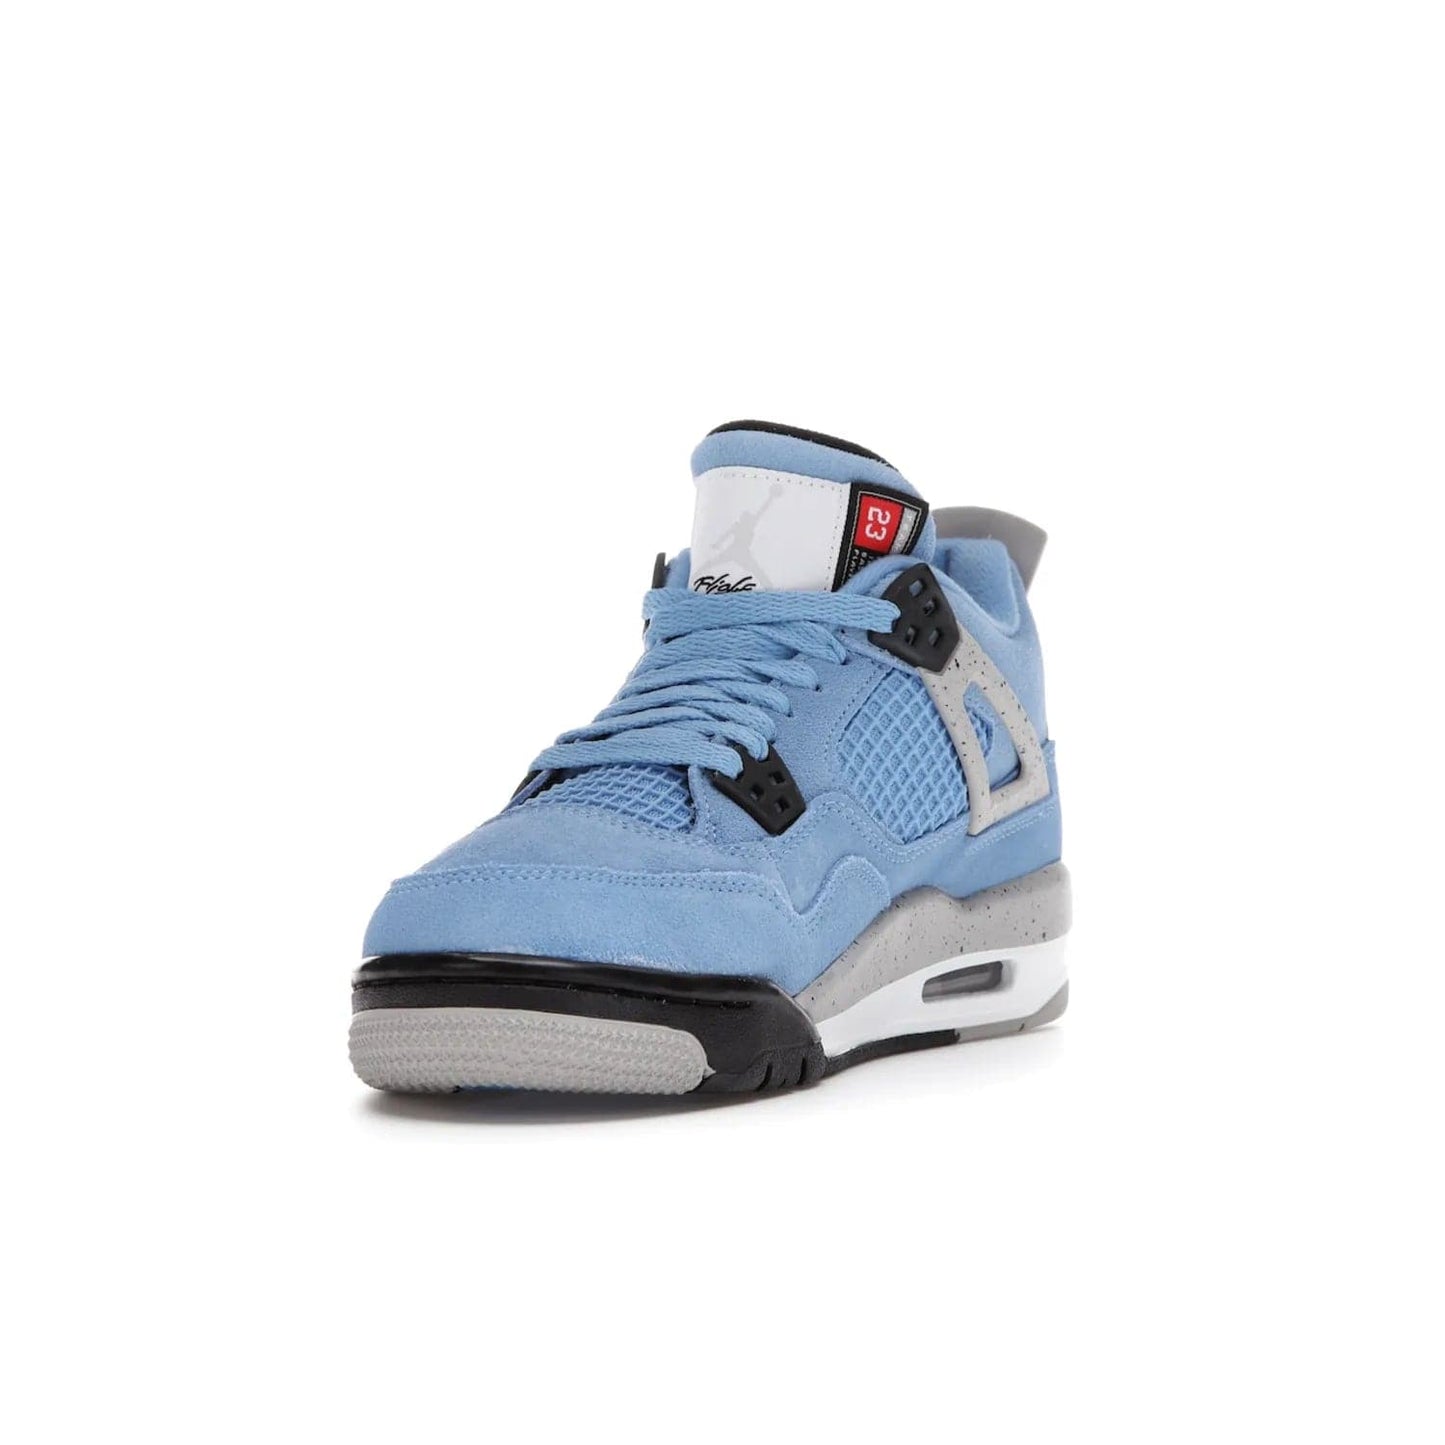 Jordan 4 Retro University Blue (GS) - Image 13 - Only at www.BallersClubKickz.com - Air Jordan 4 Retro University Blue GS: Classic silhouette and vibrant colors. Featuring a suede upper and Jumpman icon, this grade school-size shoe is perfect for collections and retails at $150.